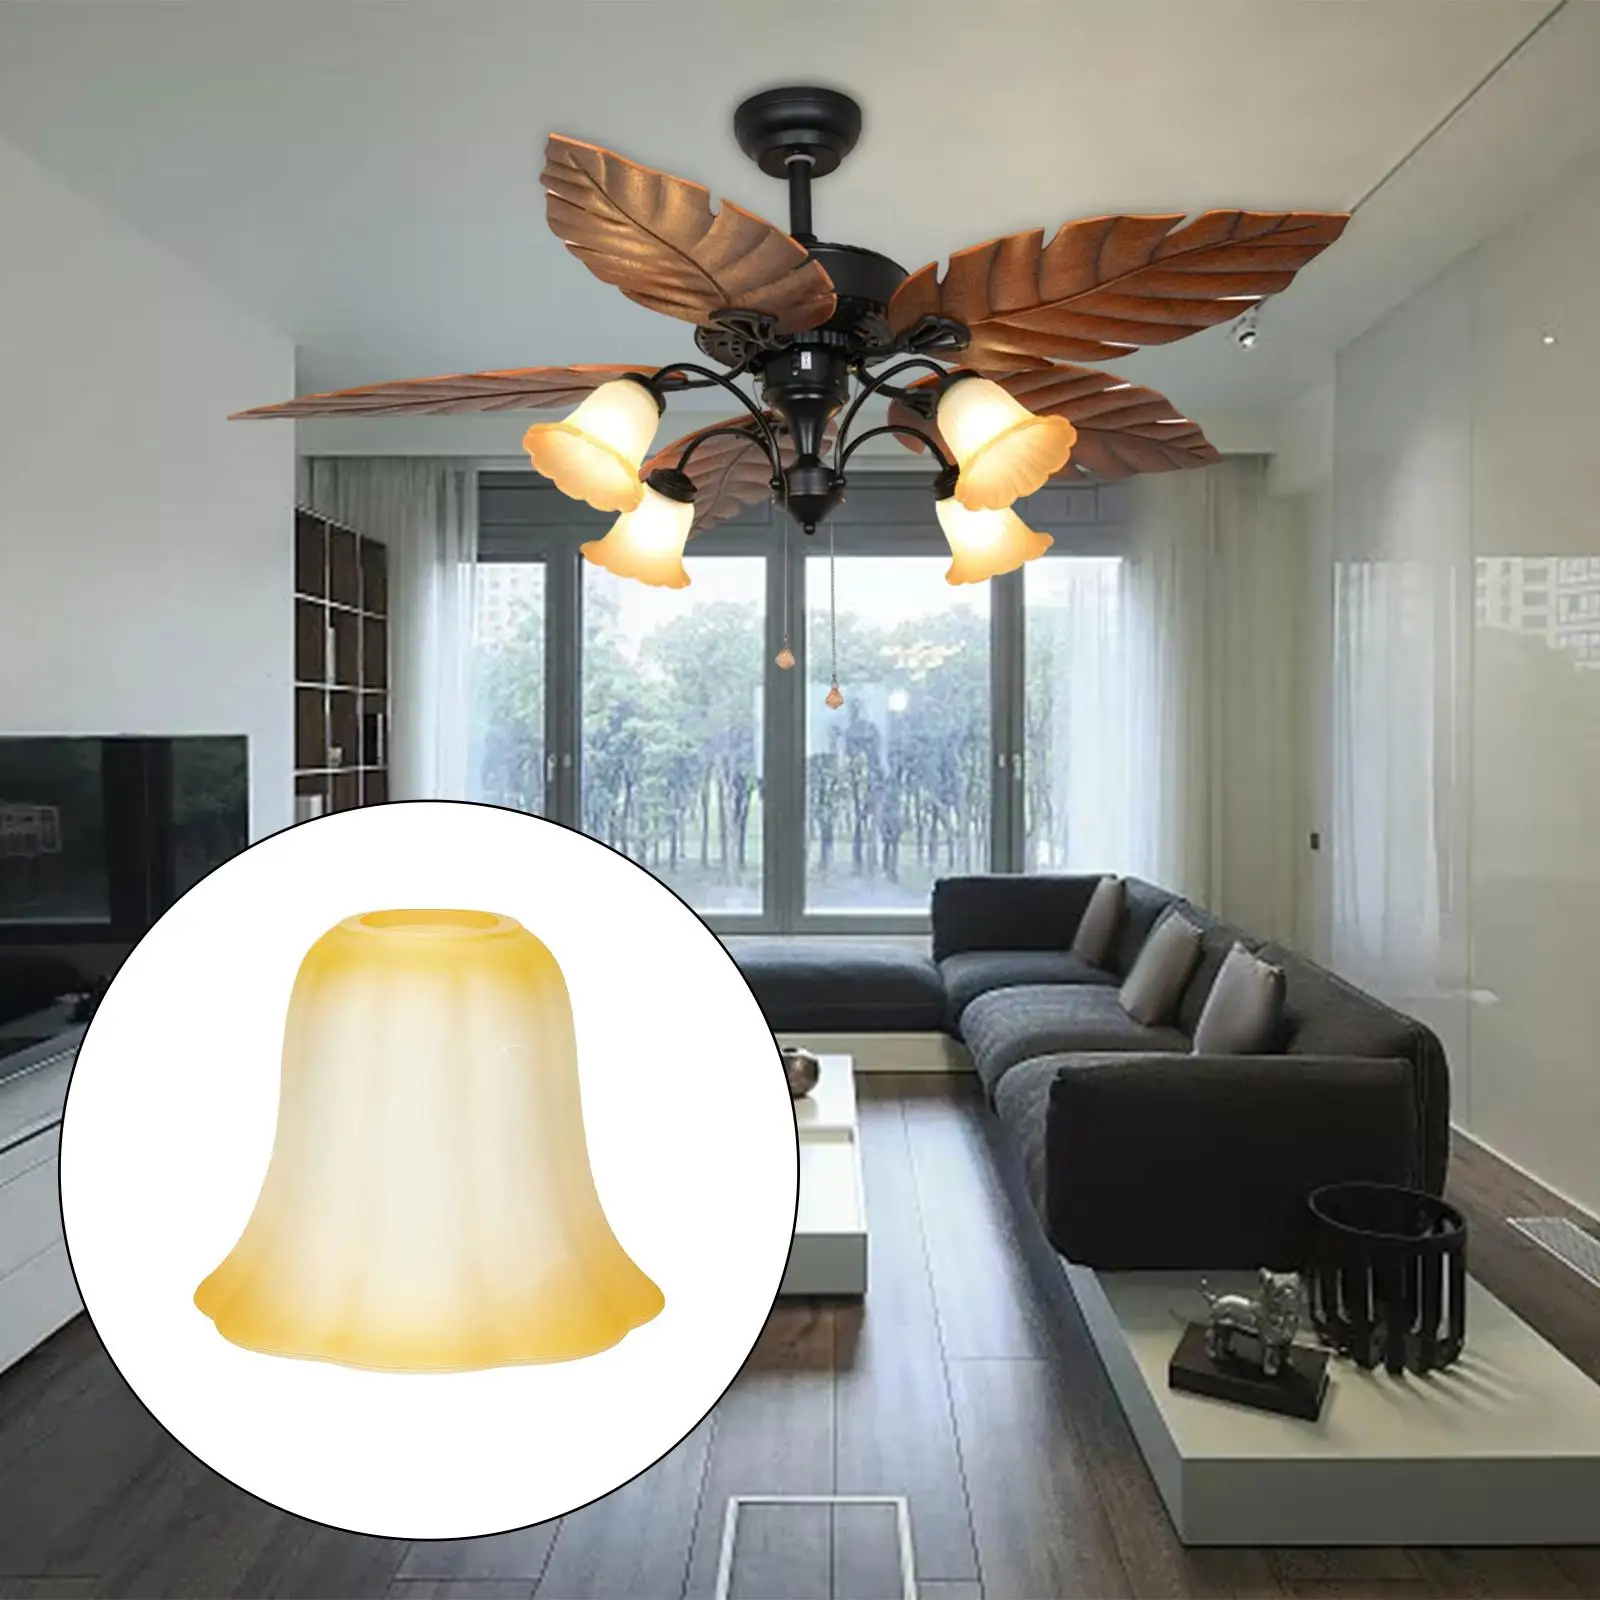 Ceiling Light Fixture Cover Lighting Accessories Frost Glass Lamp Shade for Droplight Nursery